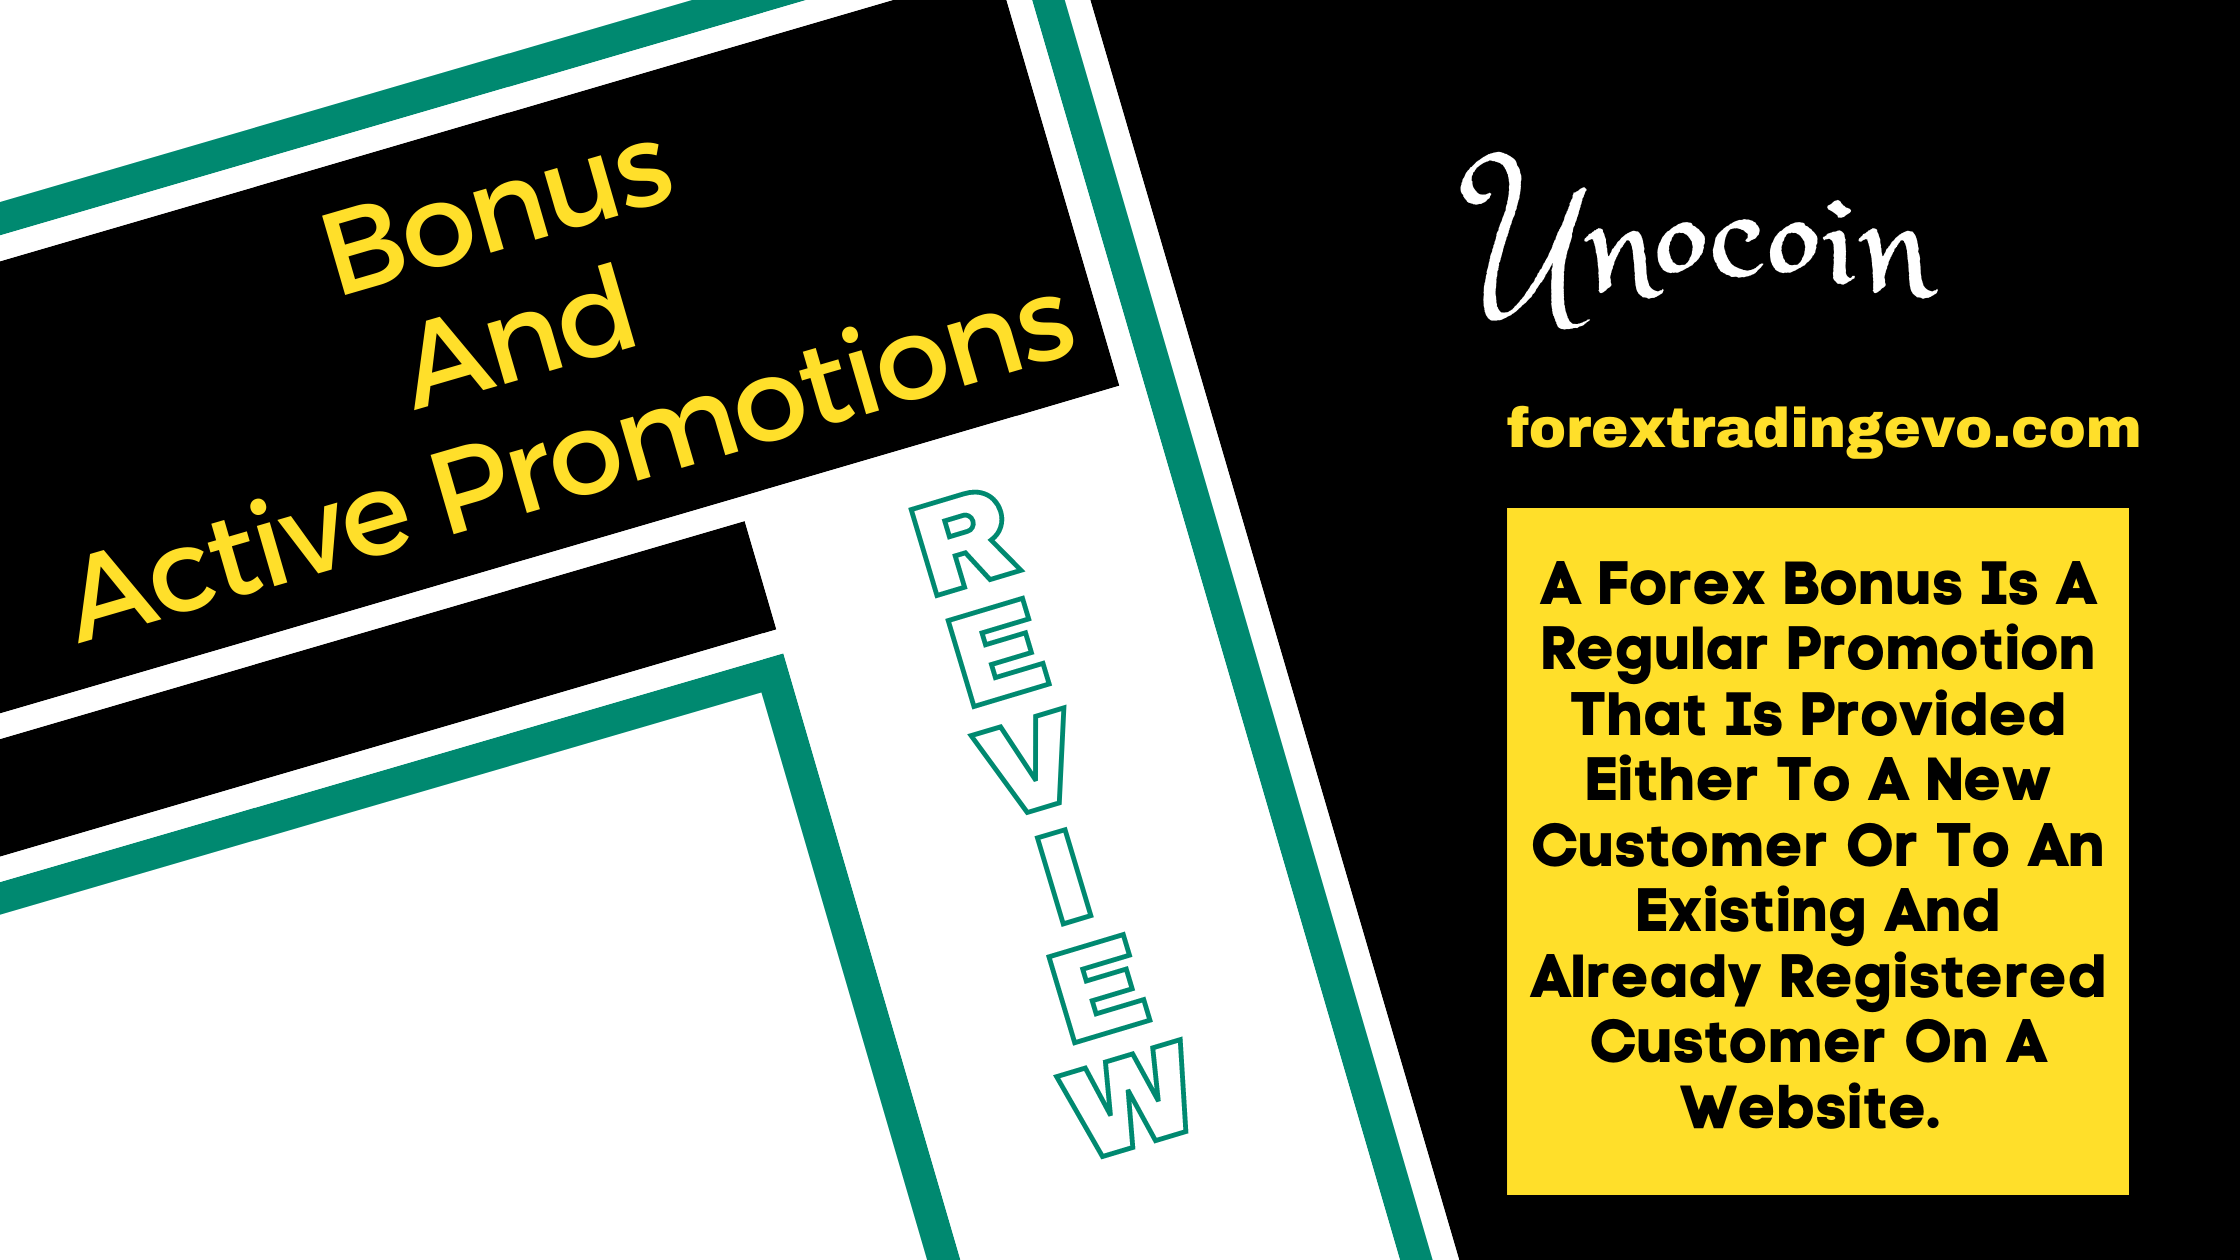 Unocoin Bonus And Promotions